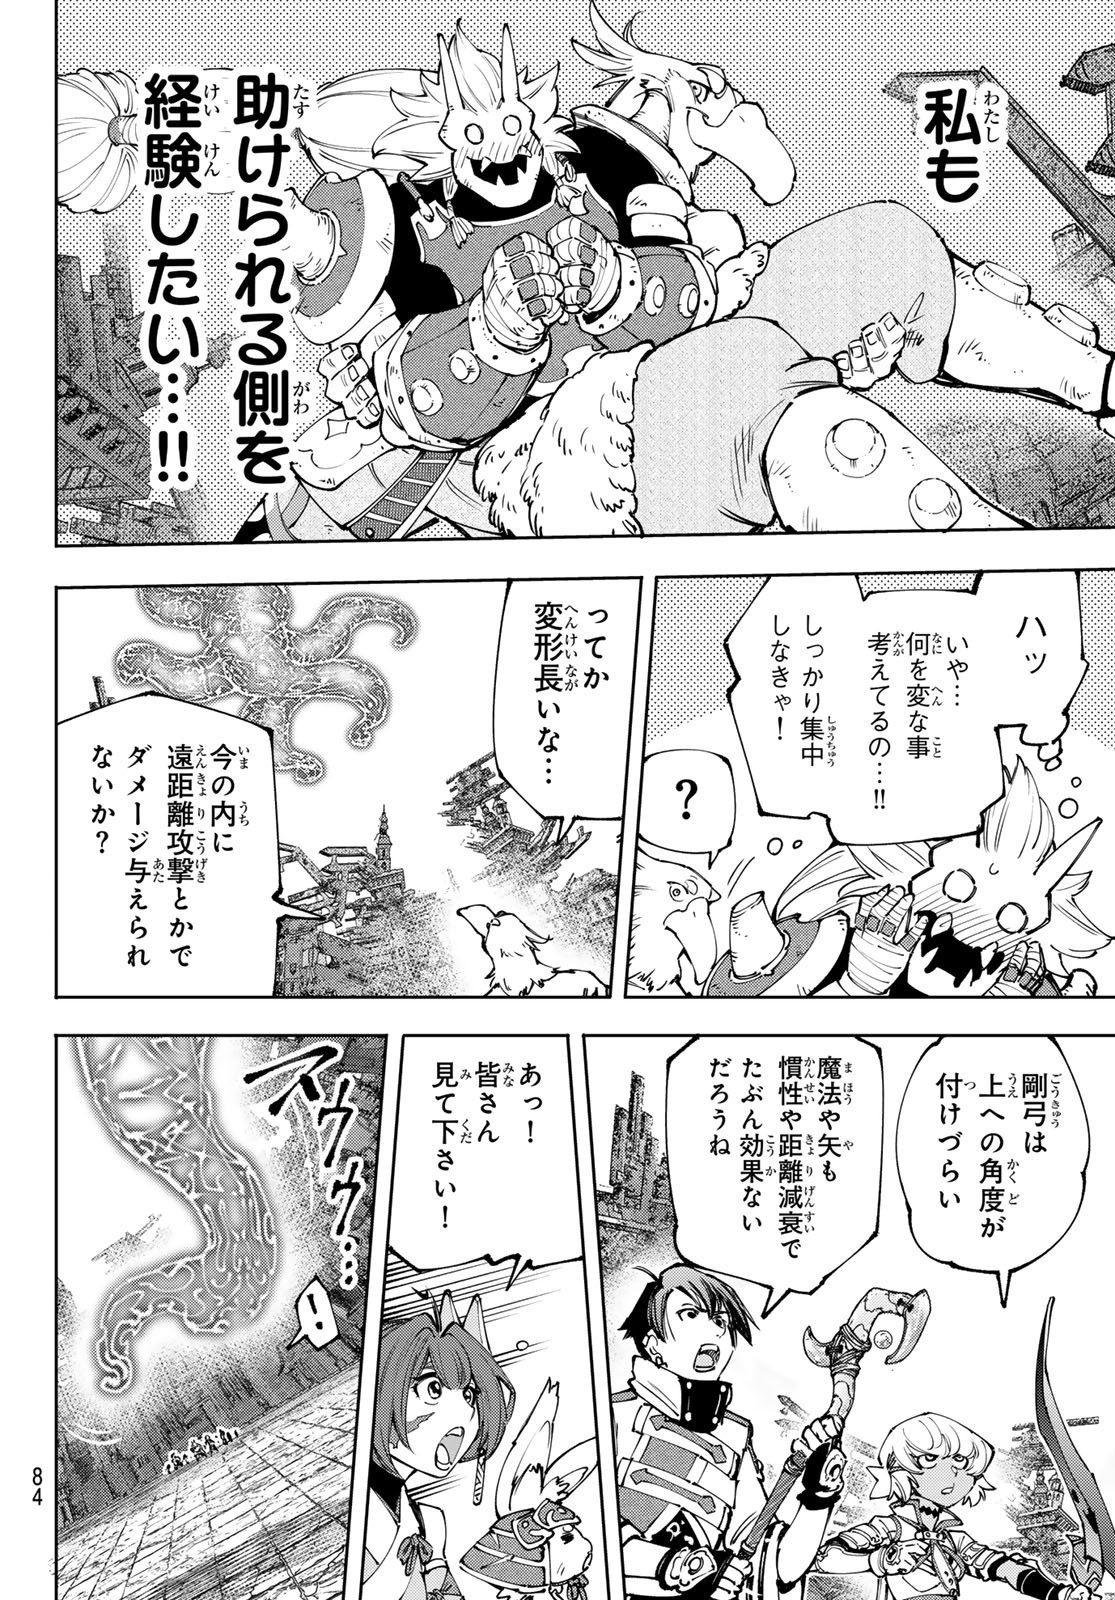 Weekly Shōnen Magazine - 週刊少年マガジン - Chapter 2024-32 - Page 82